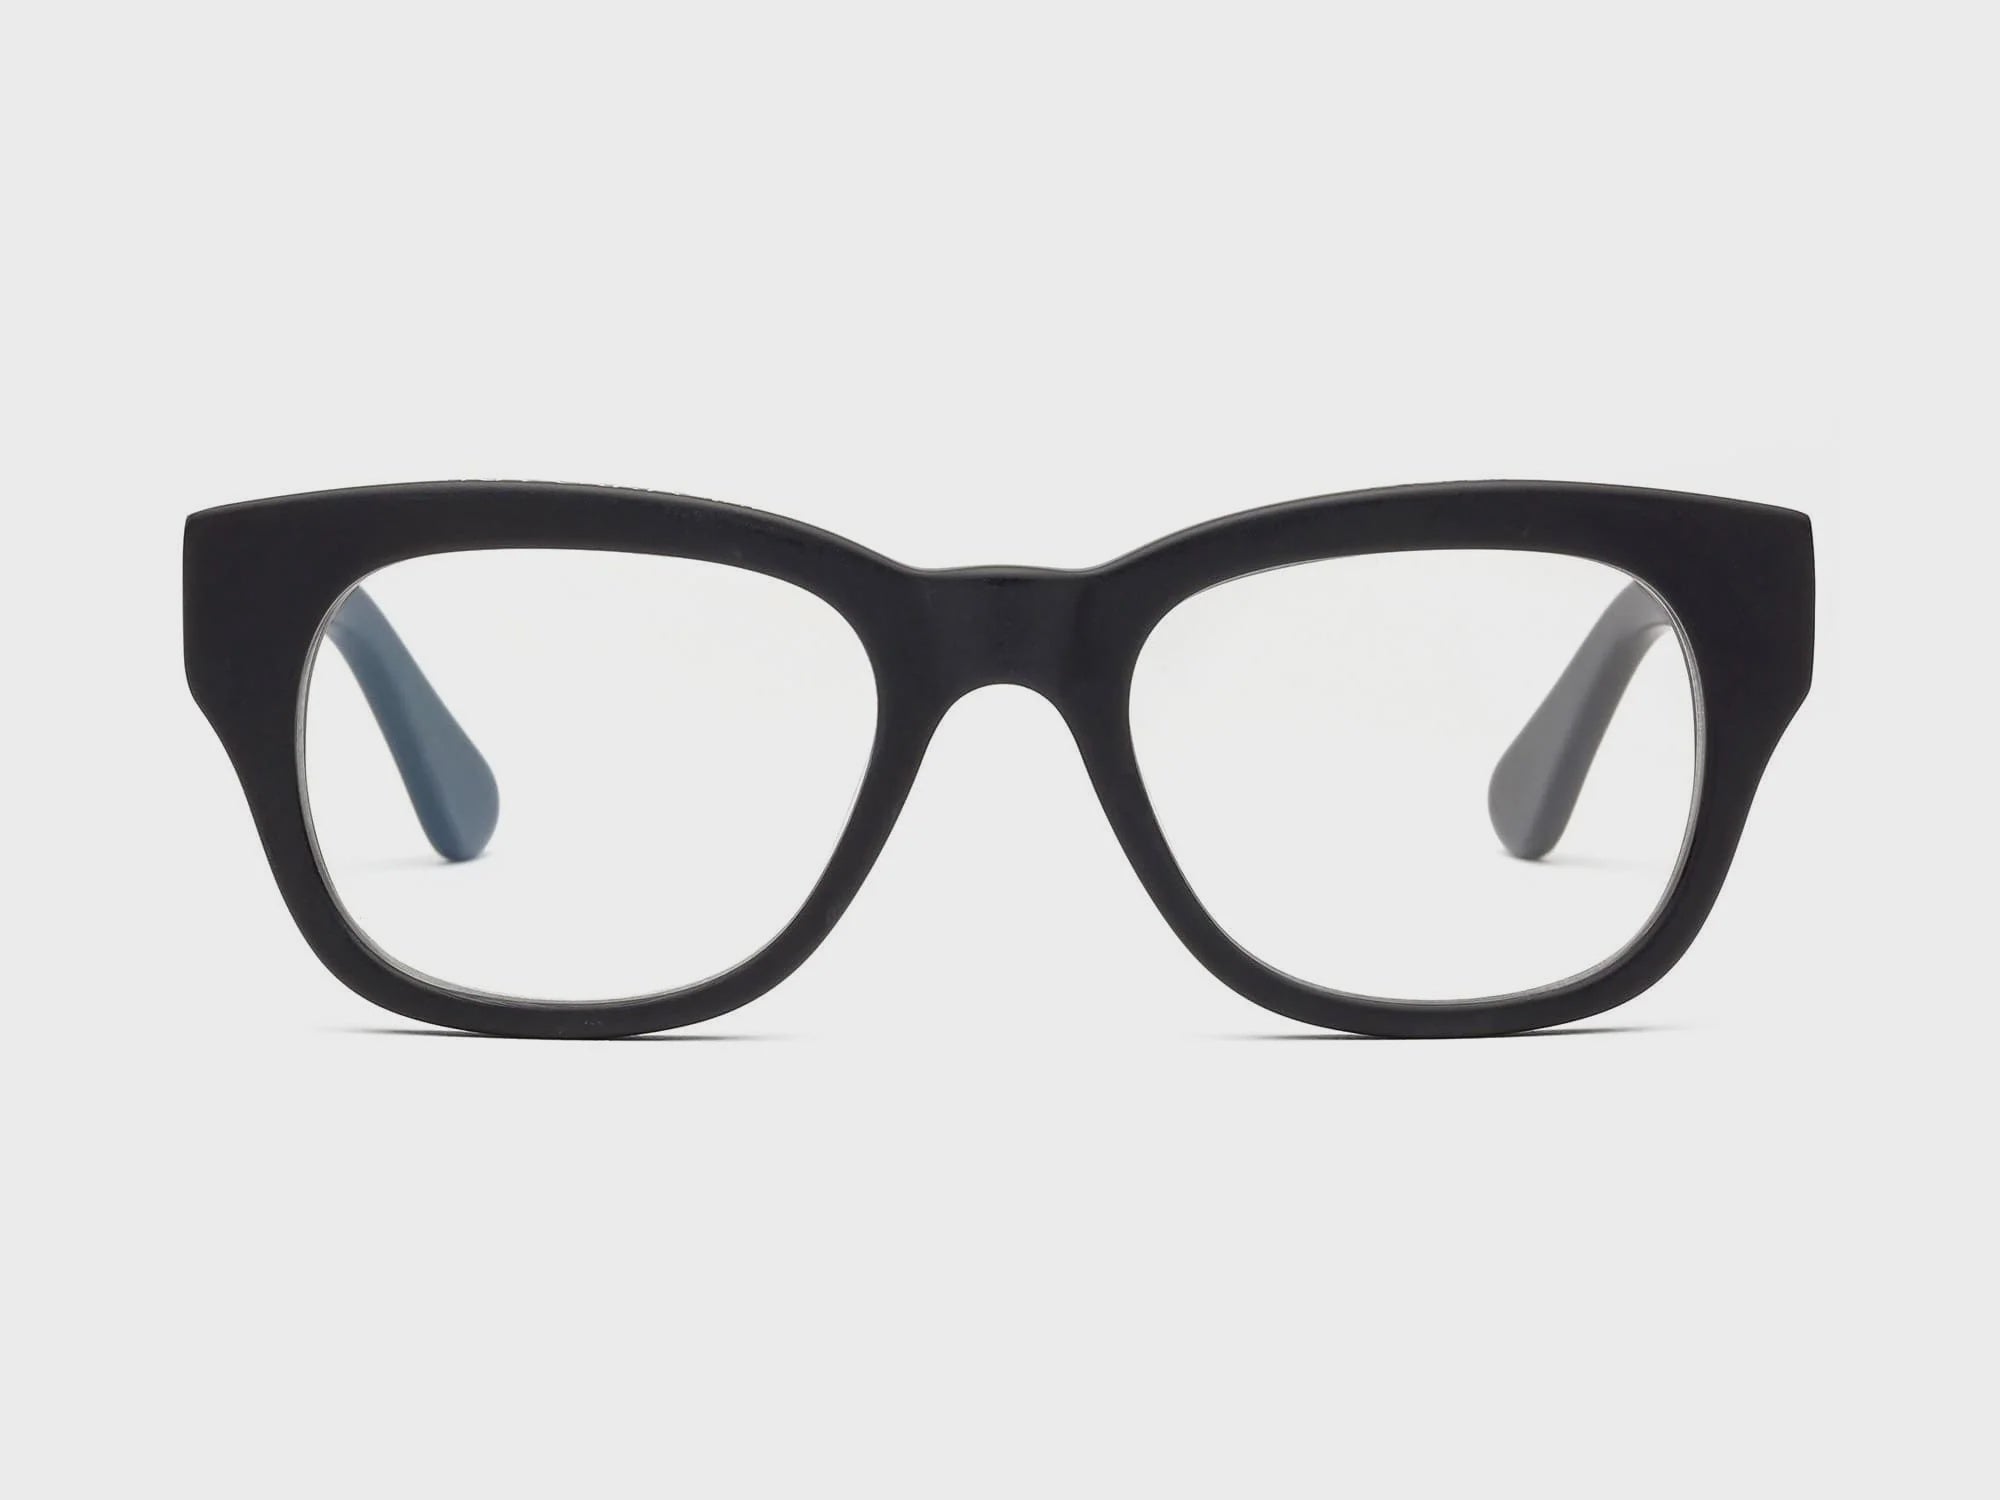 A pair of Caddis Milkos Matte Black glasses against a white background, with square oversized lenses and a pronounced bridge.